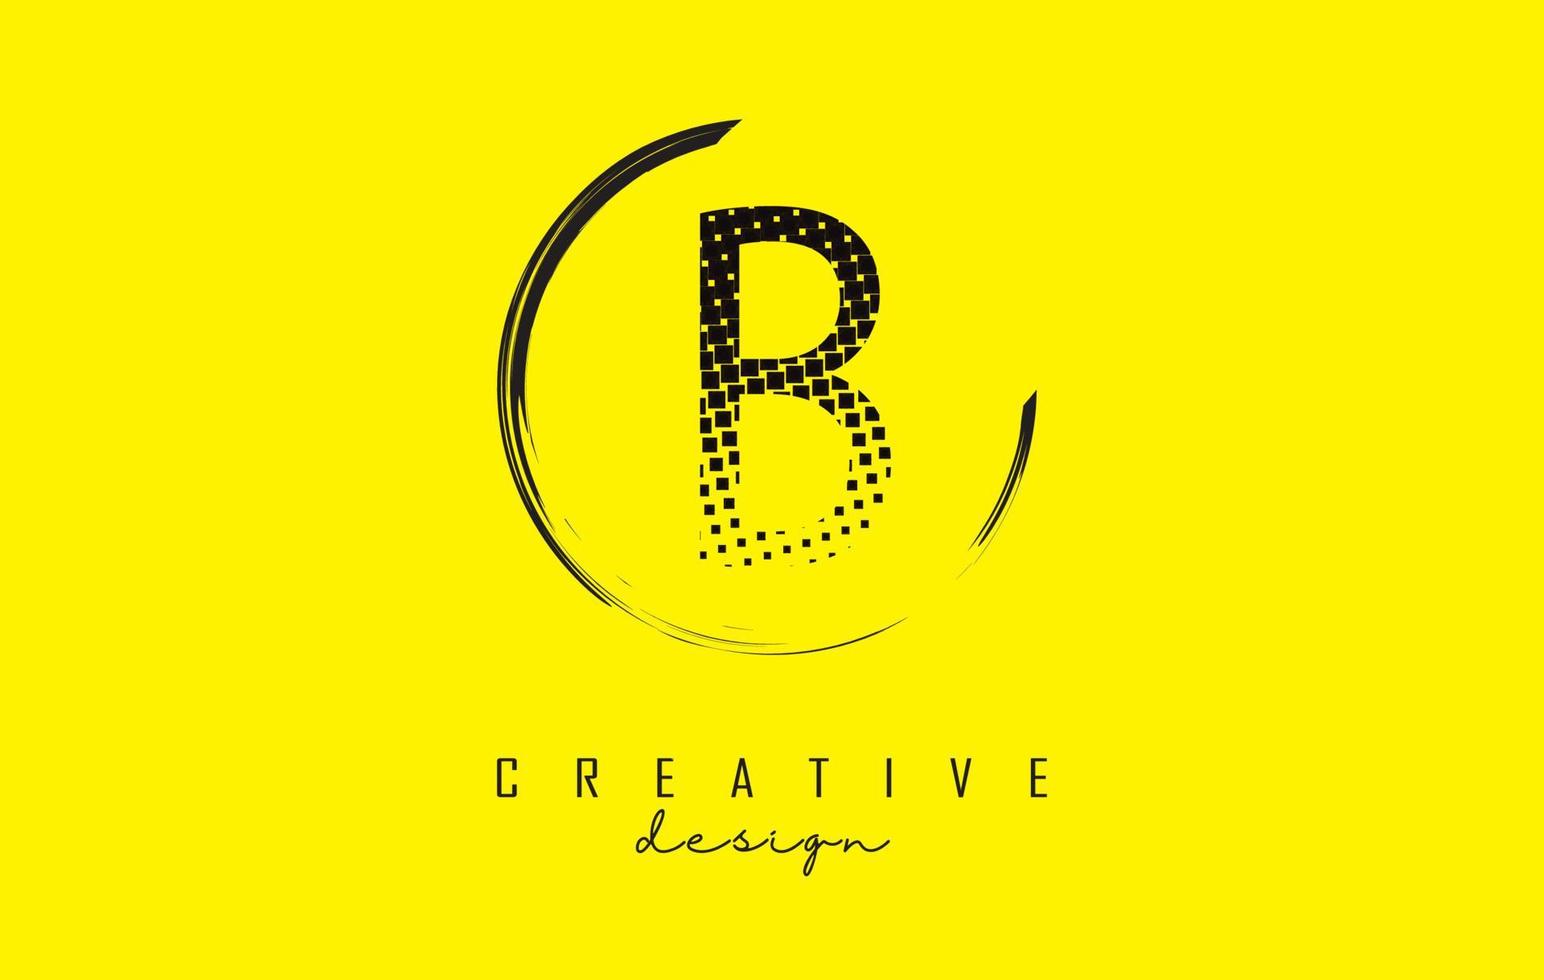 Black B letter logo design with black dots and circle frame on bright yellow background. vector